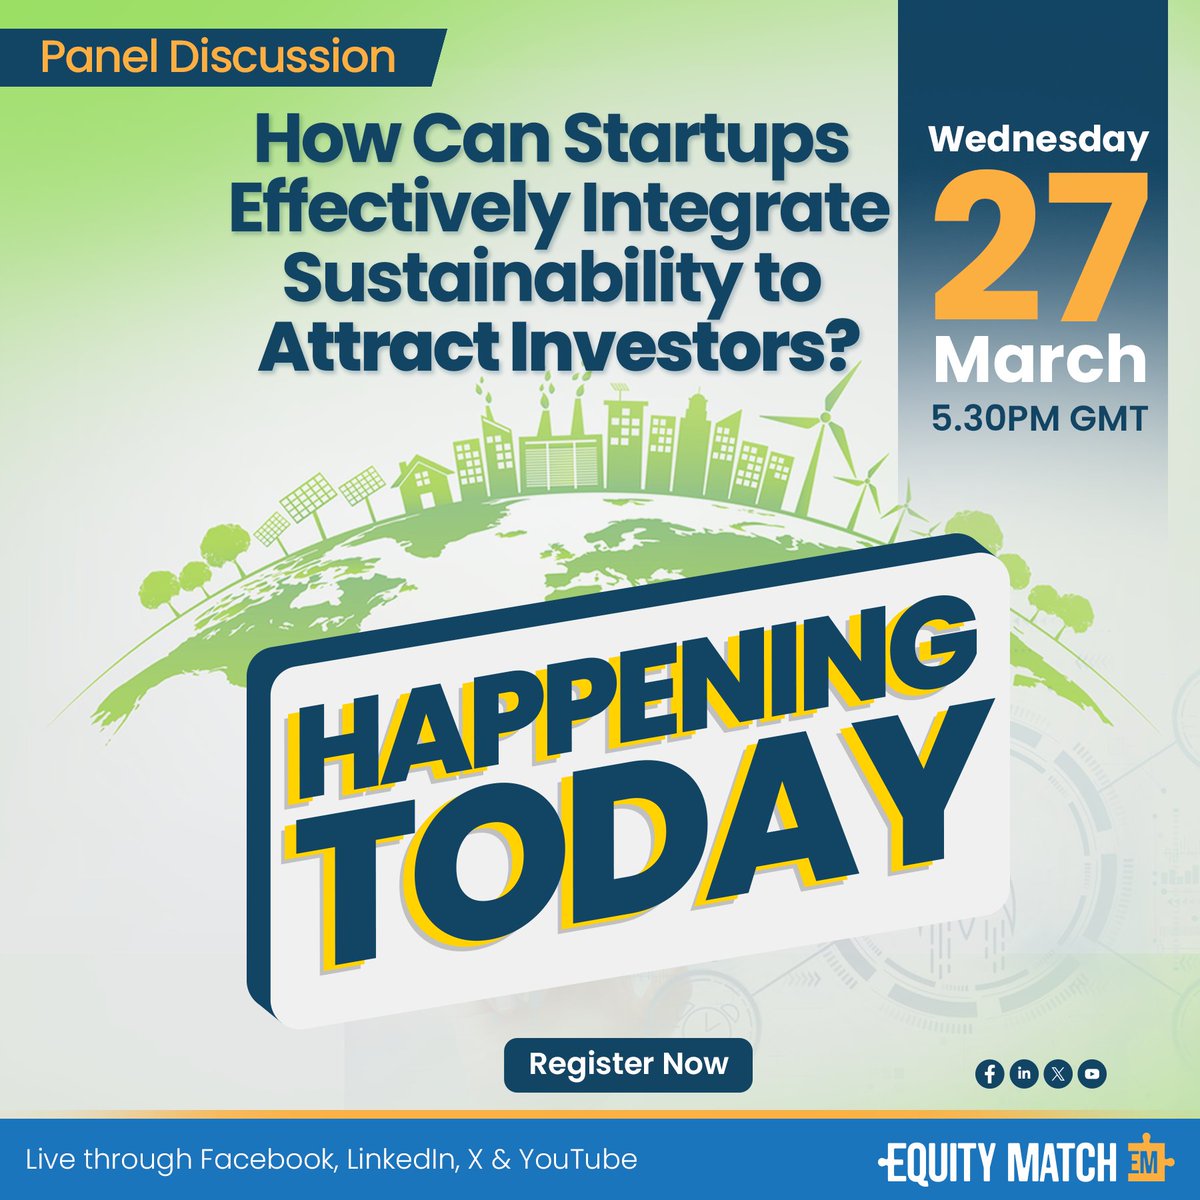 Today's the day we dive deep into how startups can integrate sustainability and attract investors.  
Join our panel of experts for a dynamic discussion packed with actionable strategies revealed!
The event streams on X space today, 5:30 PM GMT. 
 #PanelDiscussion #Webinar